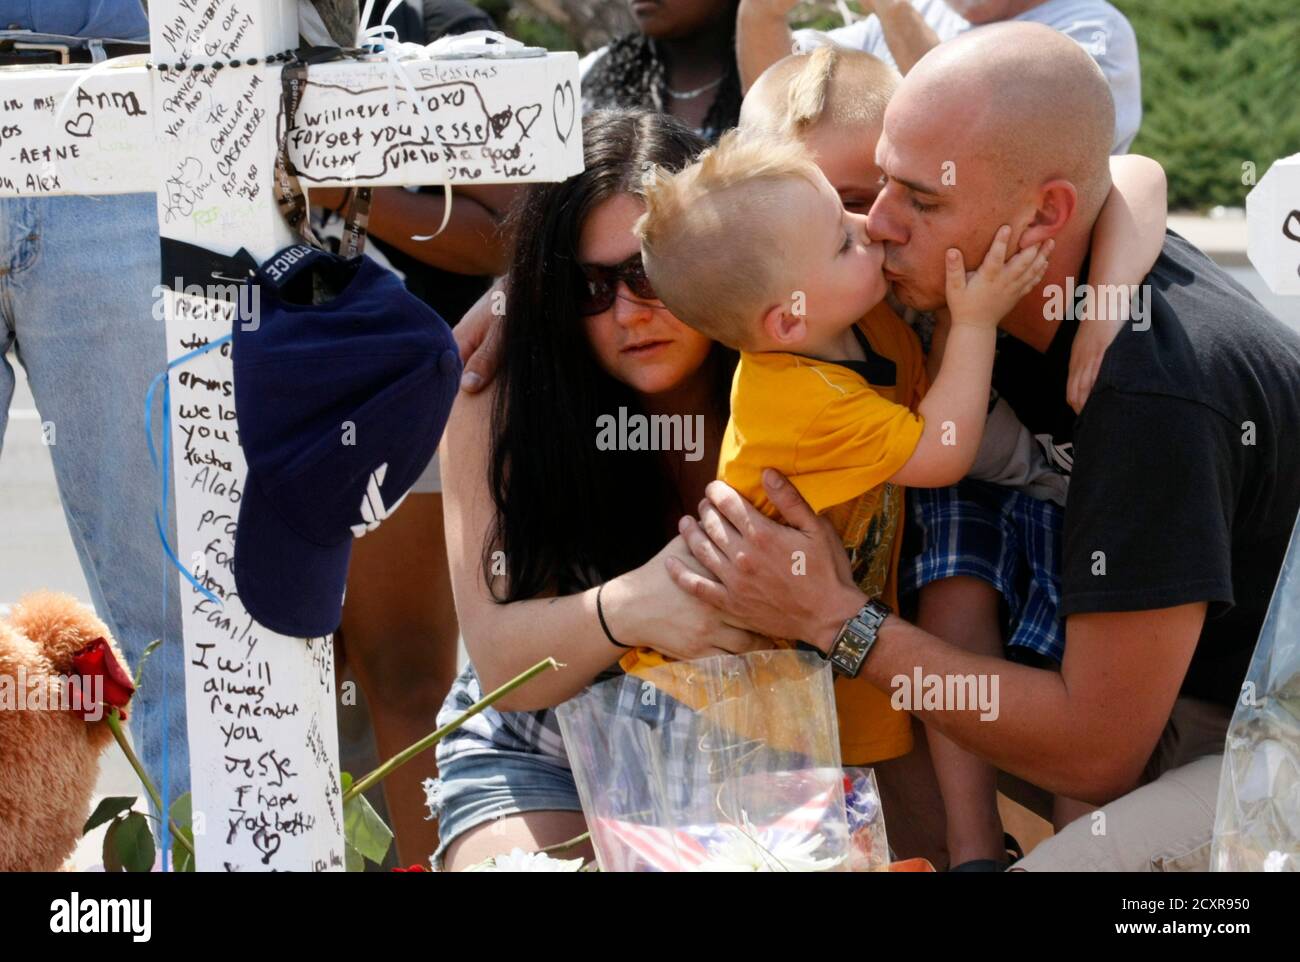 Trevor Dierecks (R) kisses his son Kameron next to his wife Rebecca (L) kneeling at a cross for Air Force Staff Sergeant Jesse Childress at a memorial near the movie theater where Childress and 11 other people where killed last Friday in Aurora, Colorado July 23, 2012. REUTERS/Rick Wilking (UNITED STATES - Tags: POLITICS DISASTER CRIME LAW) Stock Photo